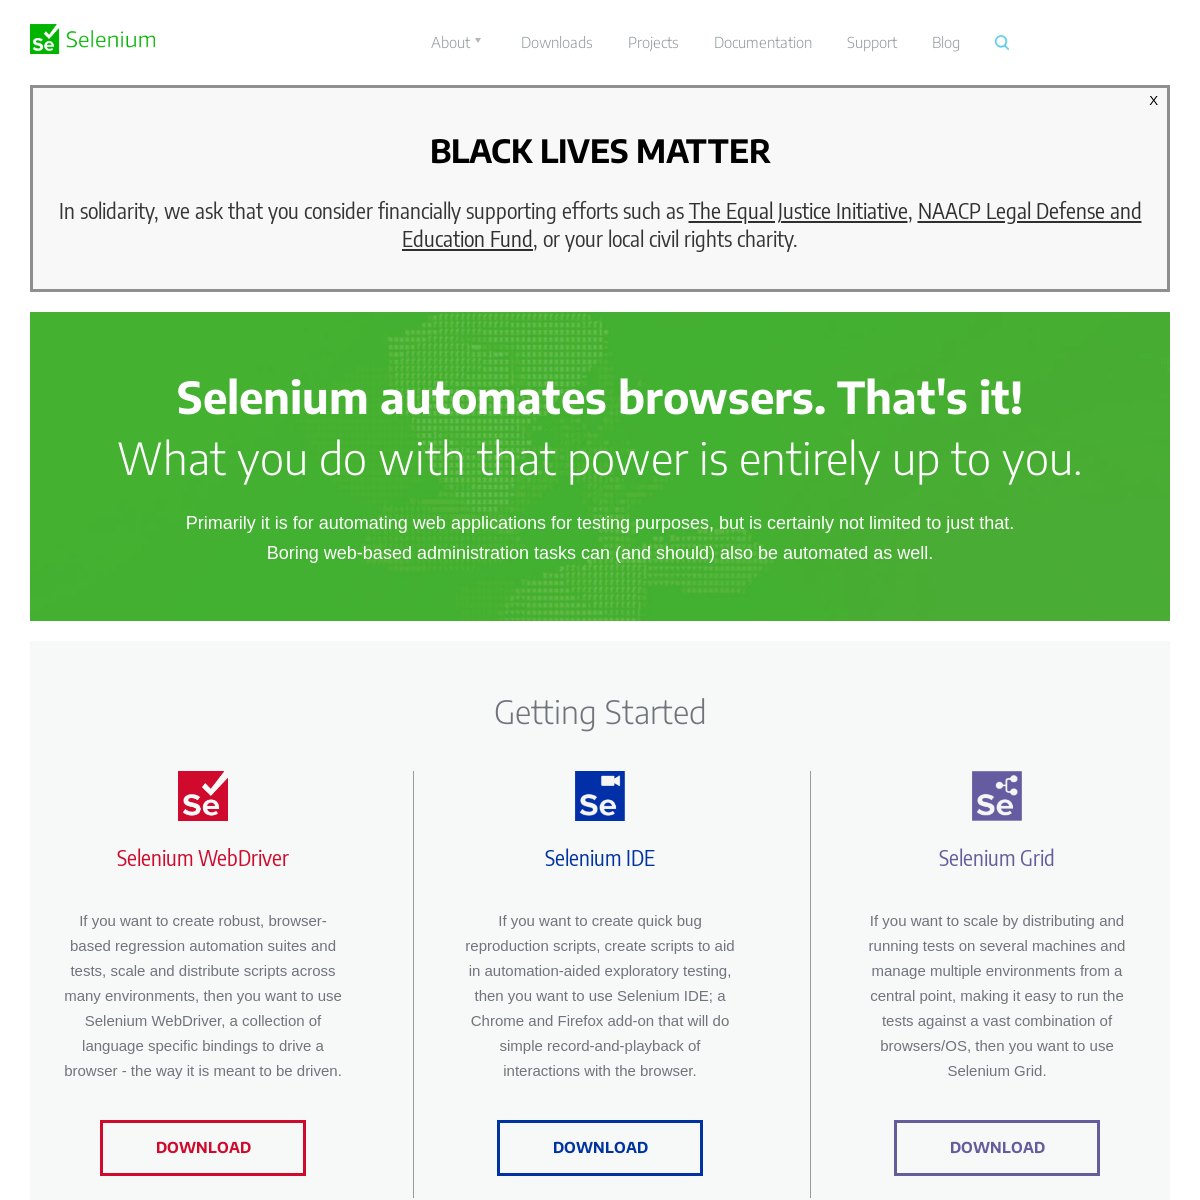 A complete backup of seleniumhq.org